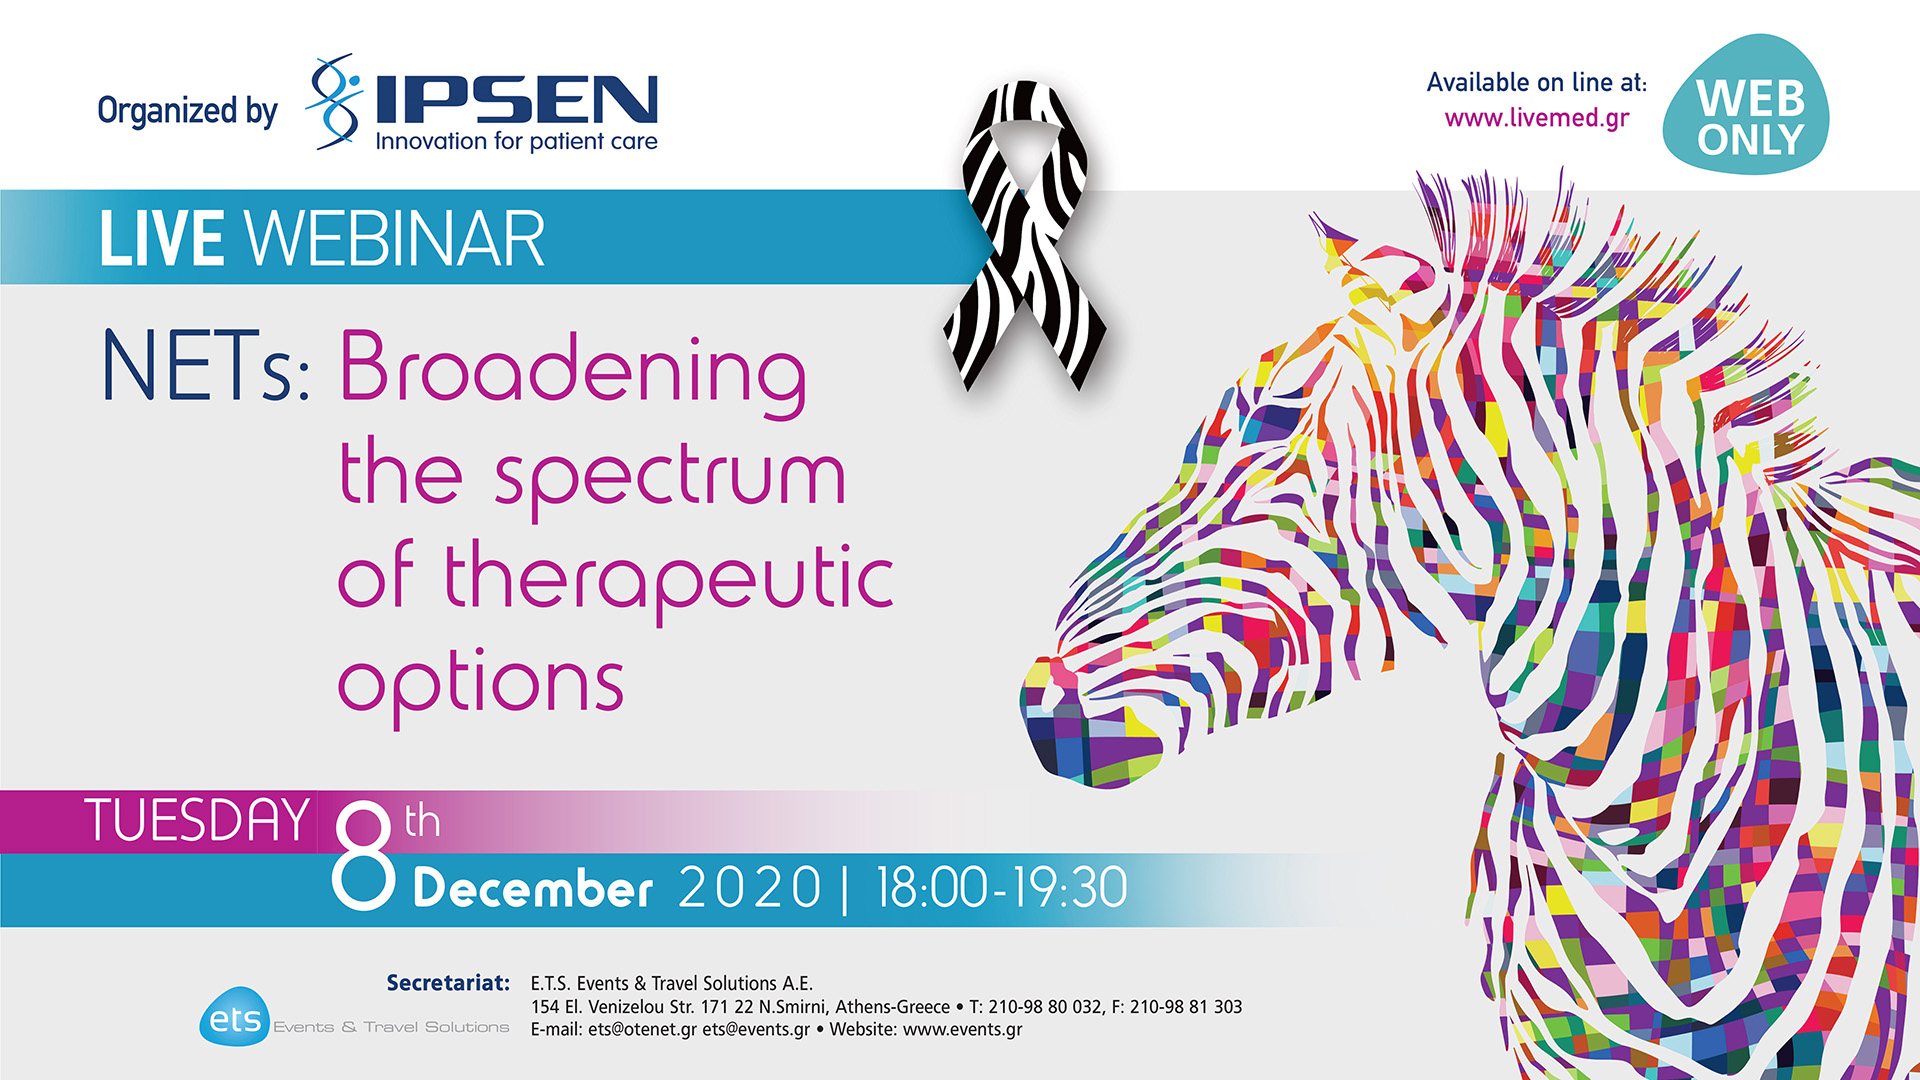 Live Webinar - NETs: Broadening the spectrum of therapeutic options